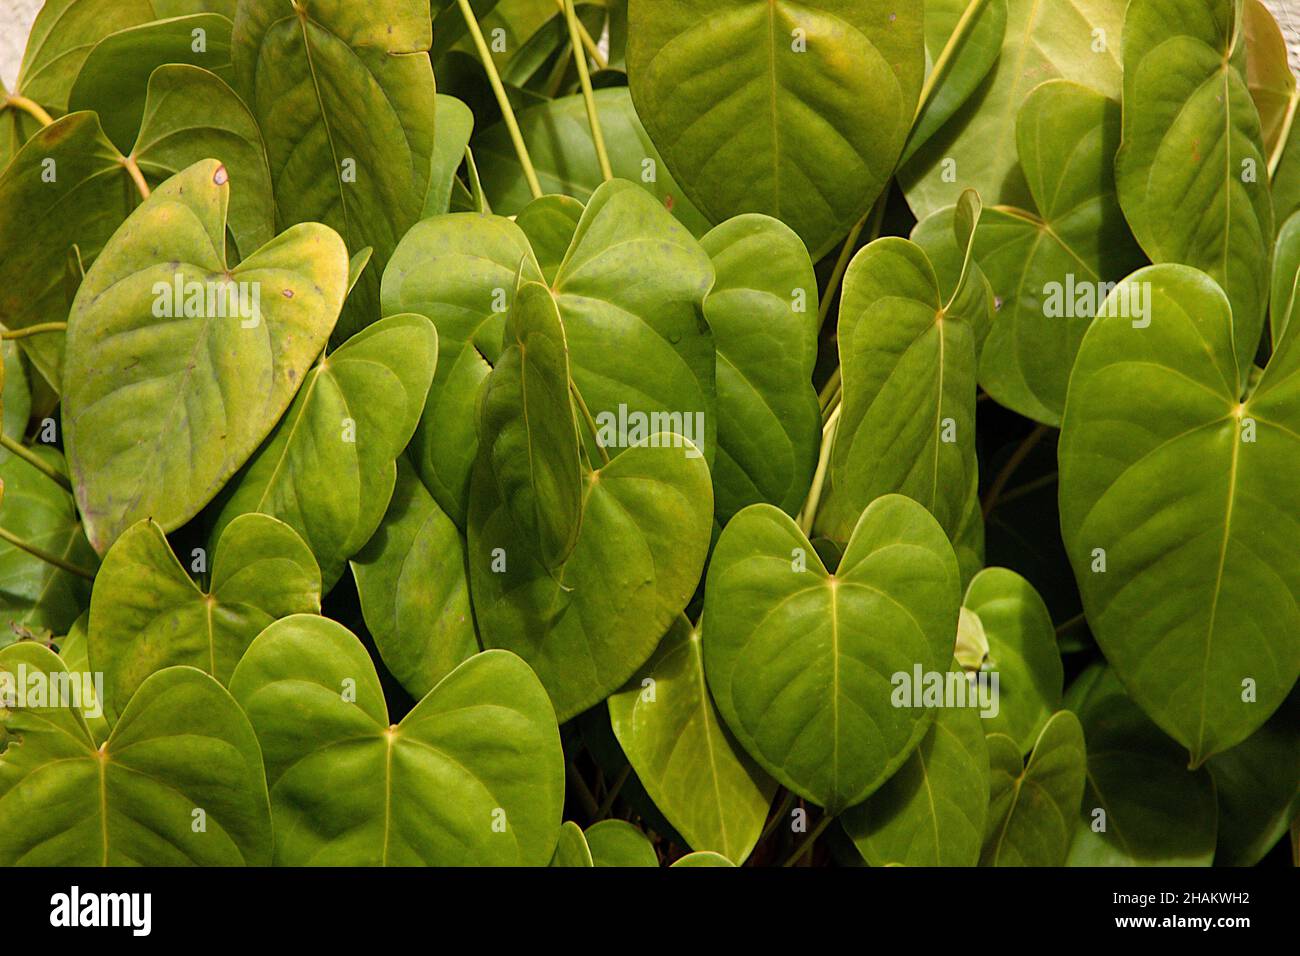 Close-up shot of the Heart-shaped moonseed plant leaves. Stock Photo